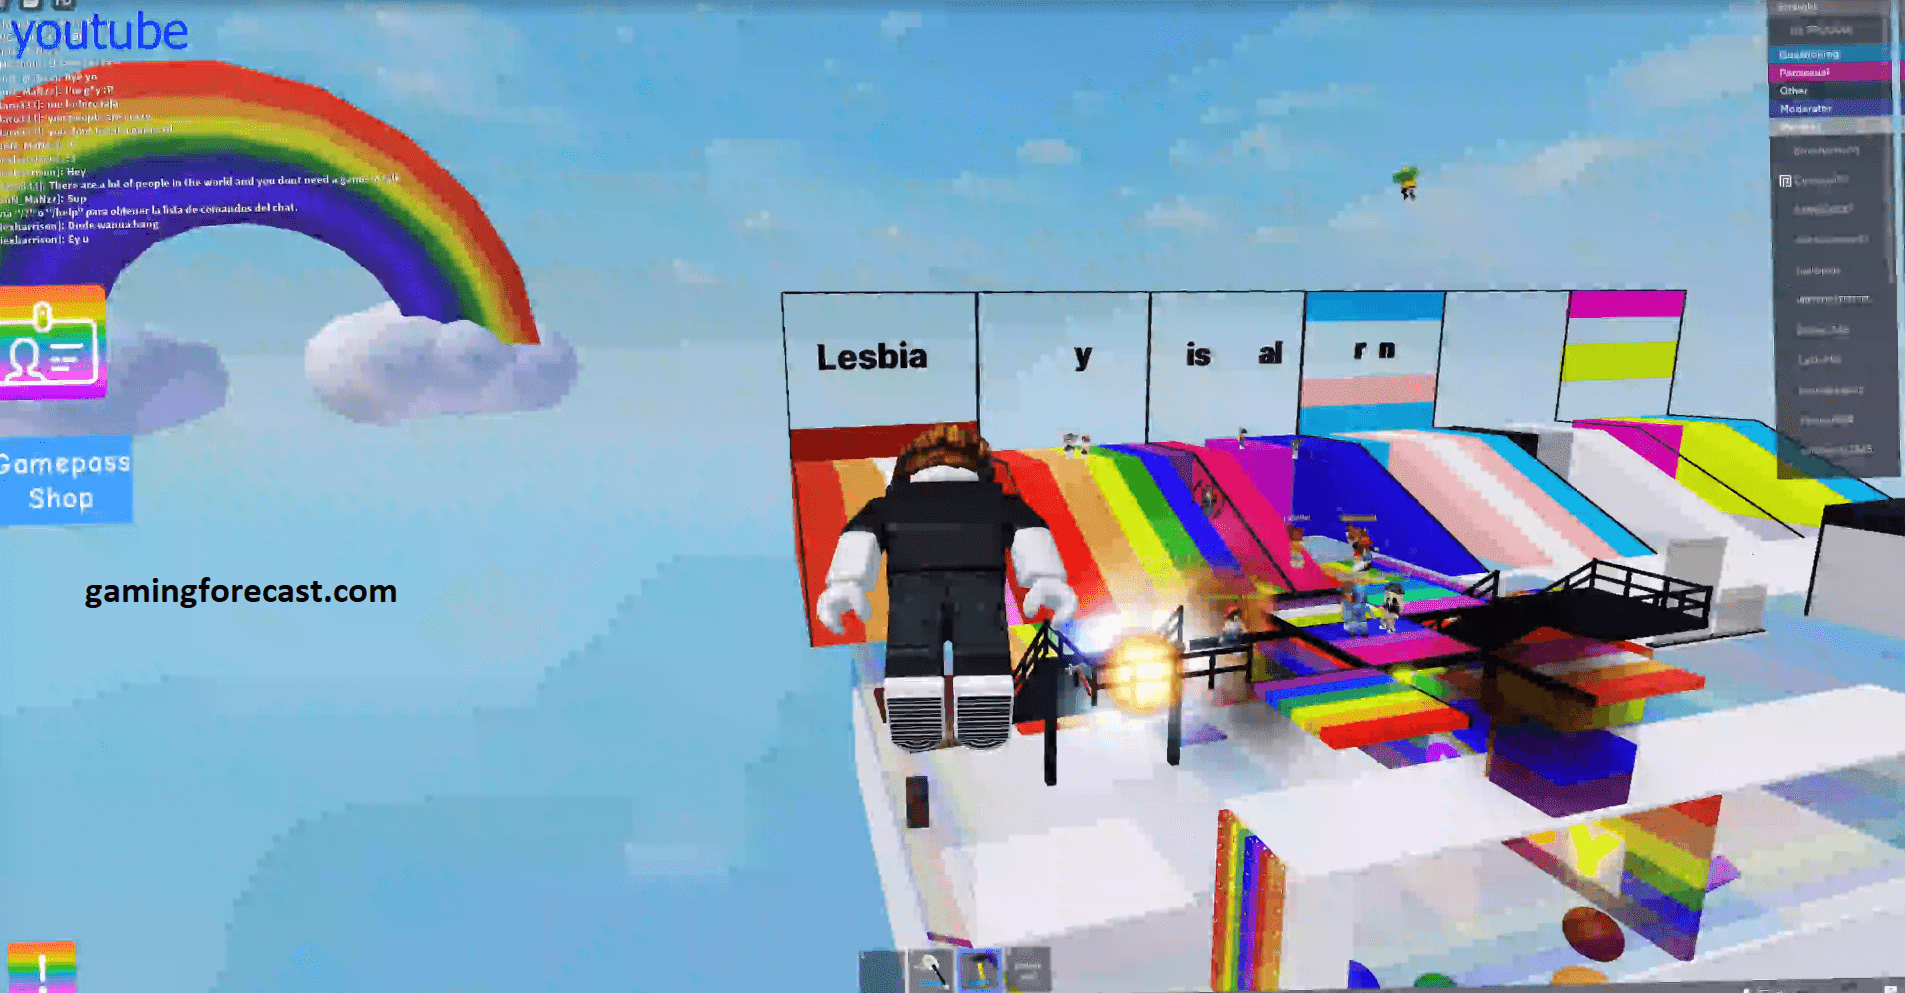 Roblox Hack Download Pc Destroy Lobby Fly Aimbot Scripts 2021 Gaming Forecast Download Free Online Game Hacks - roblox hacked catalog download pc